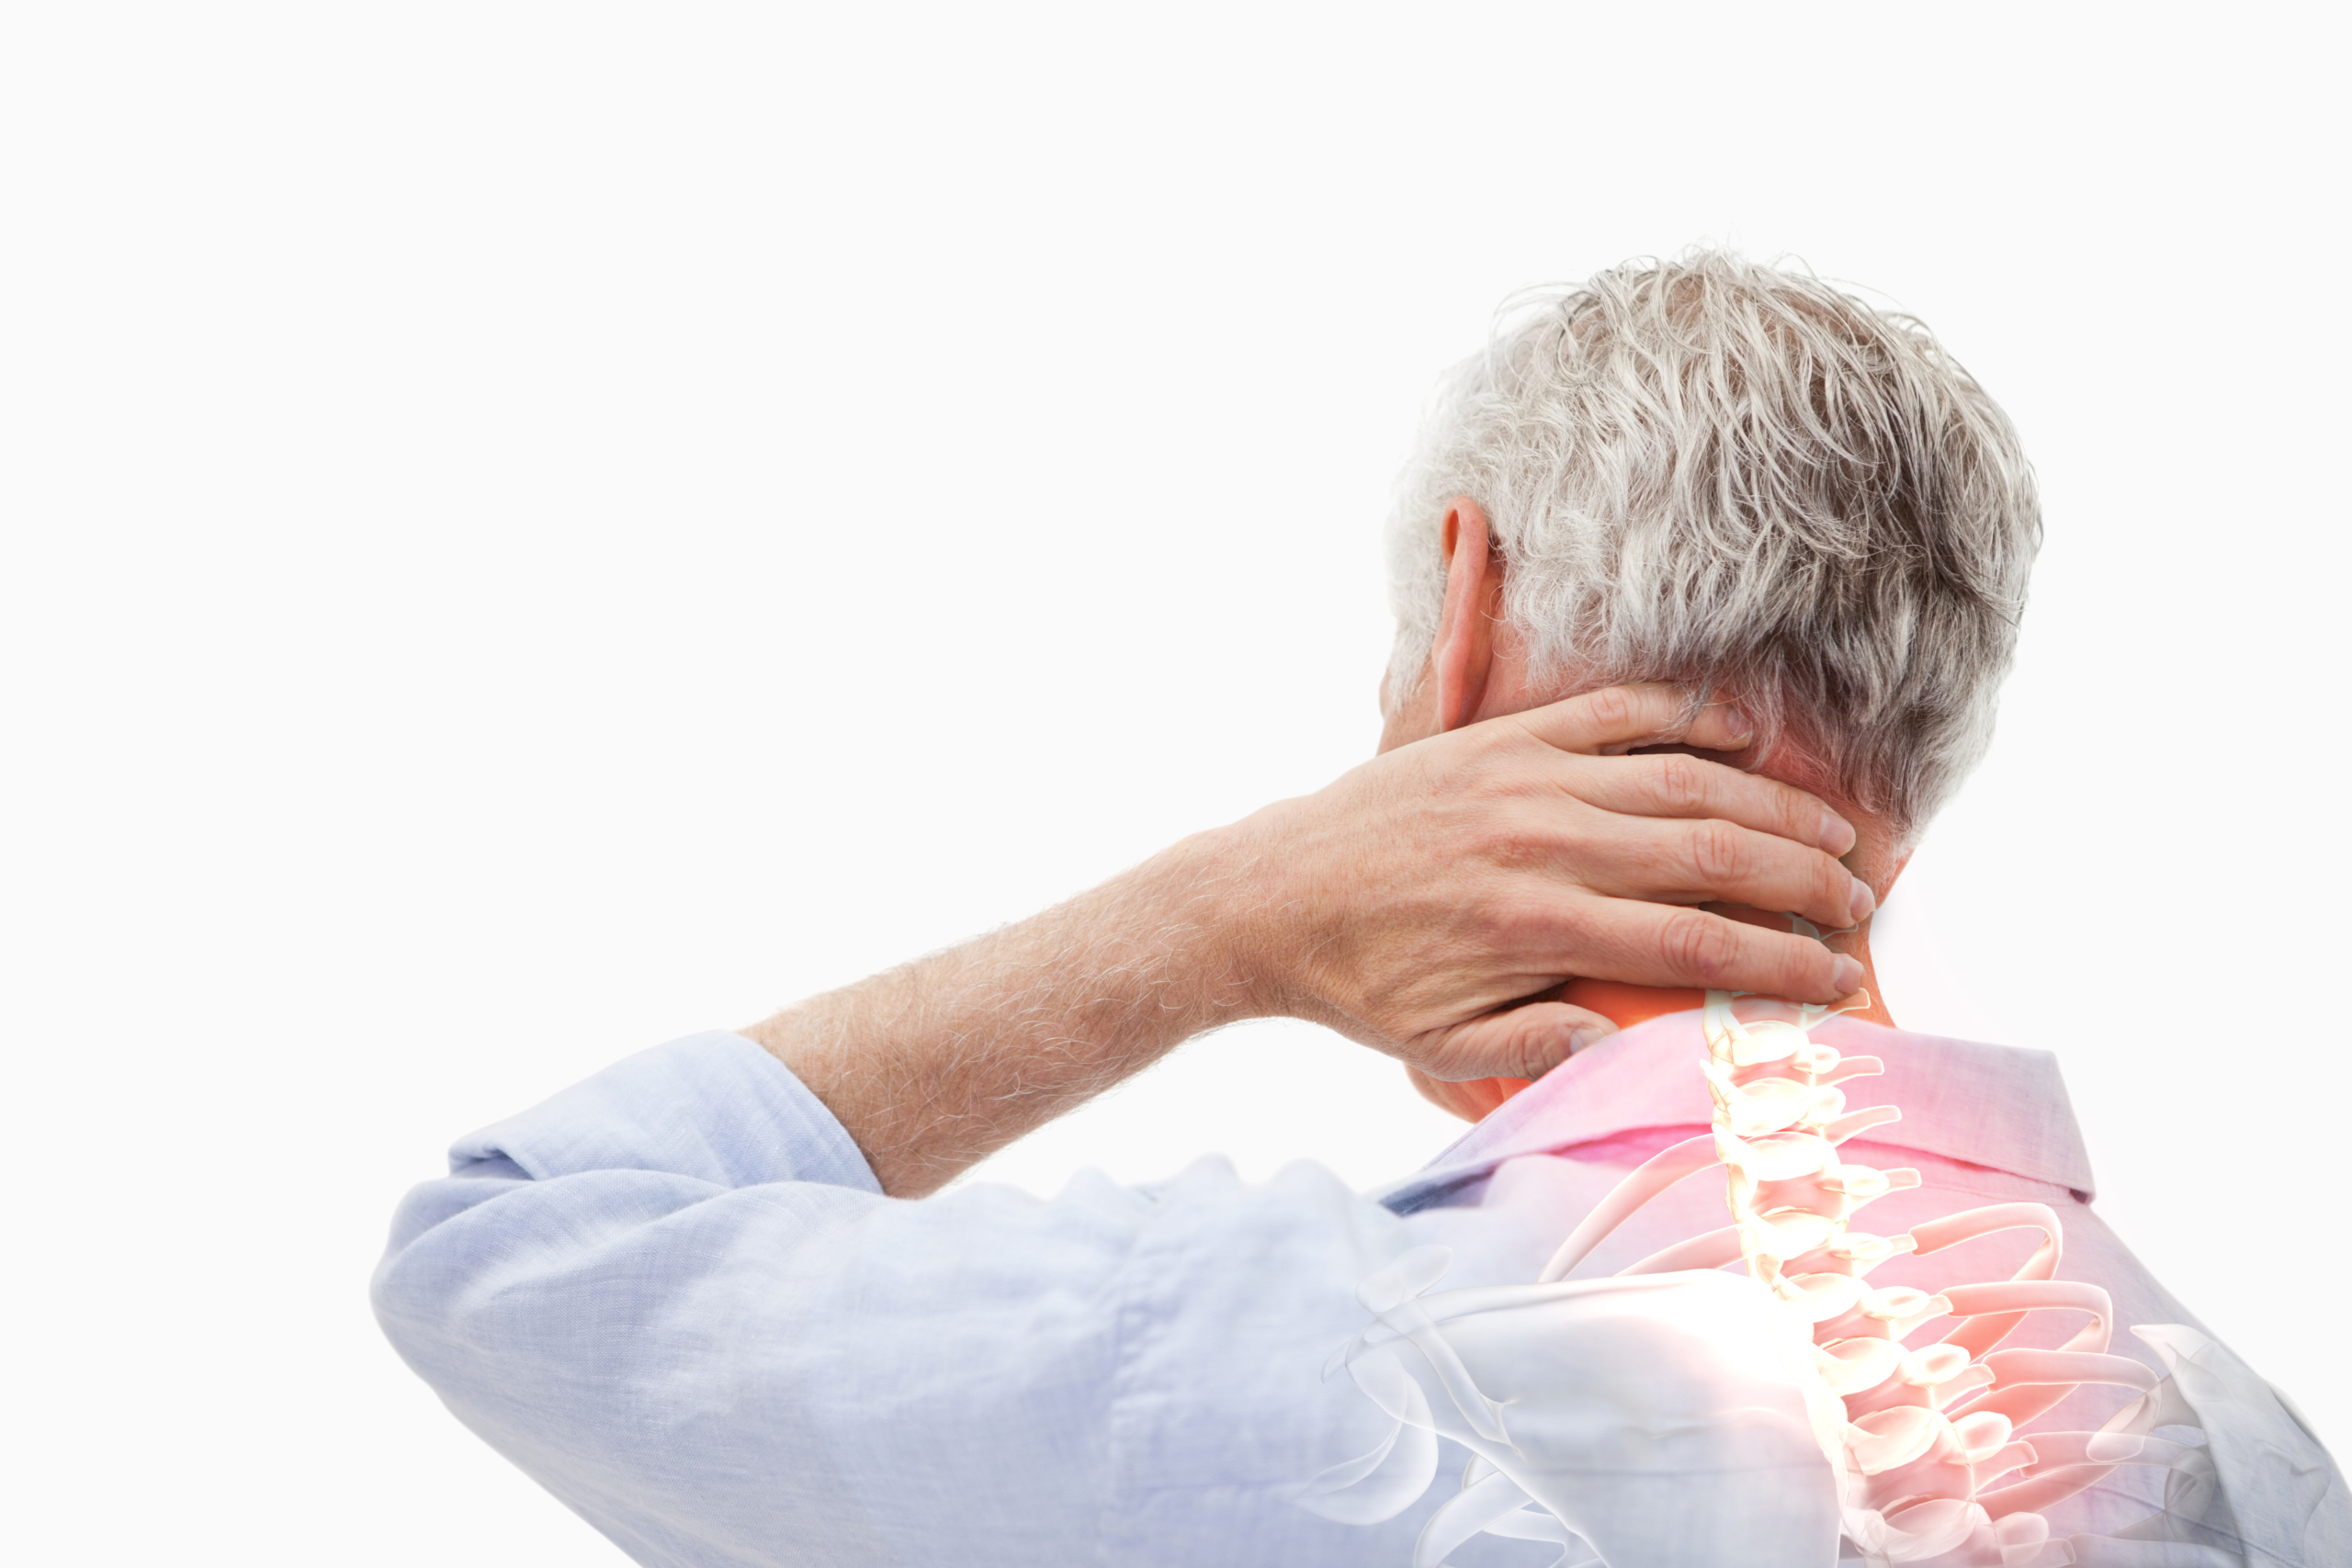 man in need of back pain relief through physical therapy